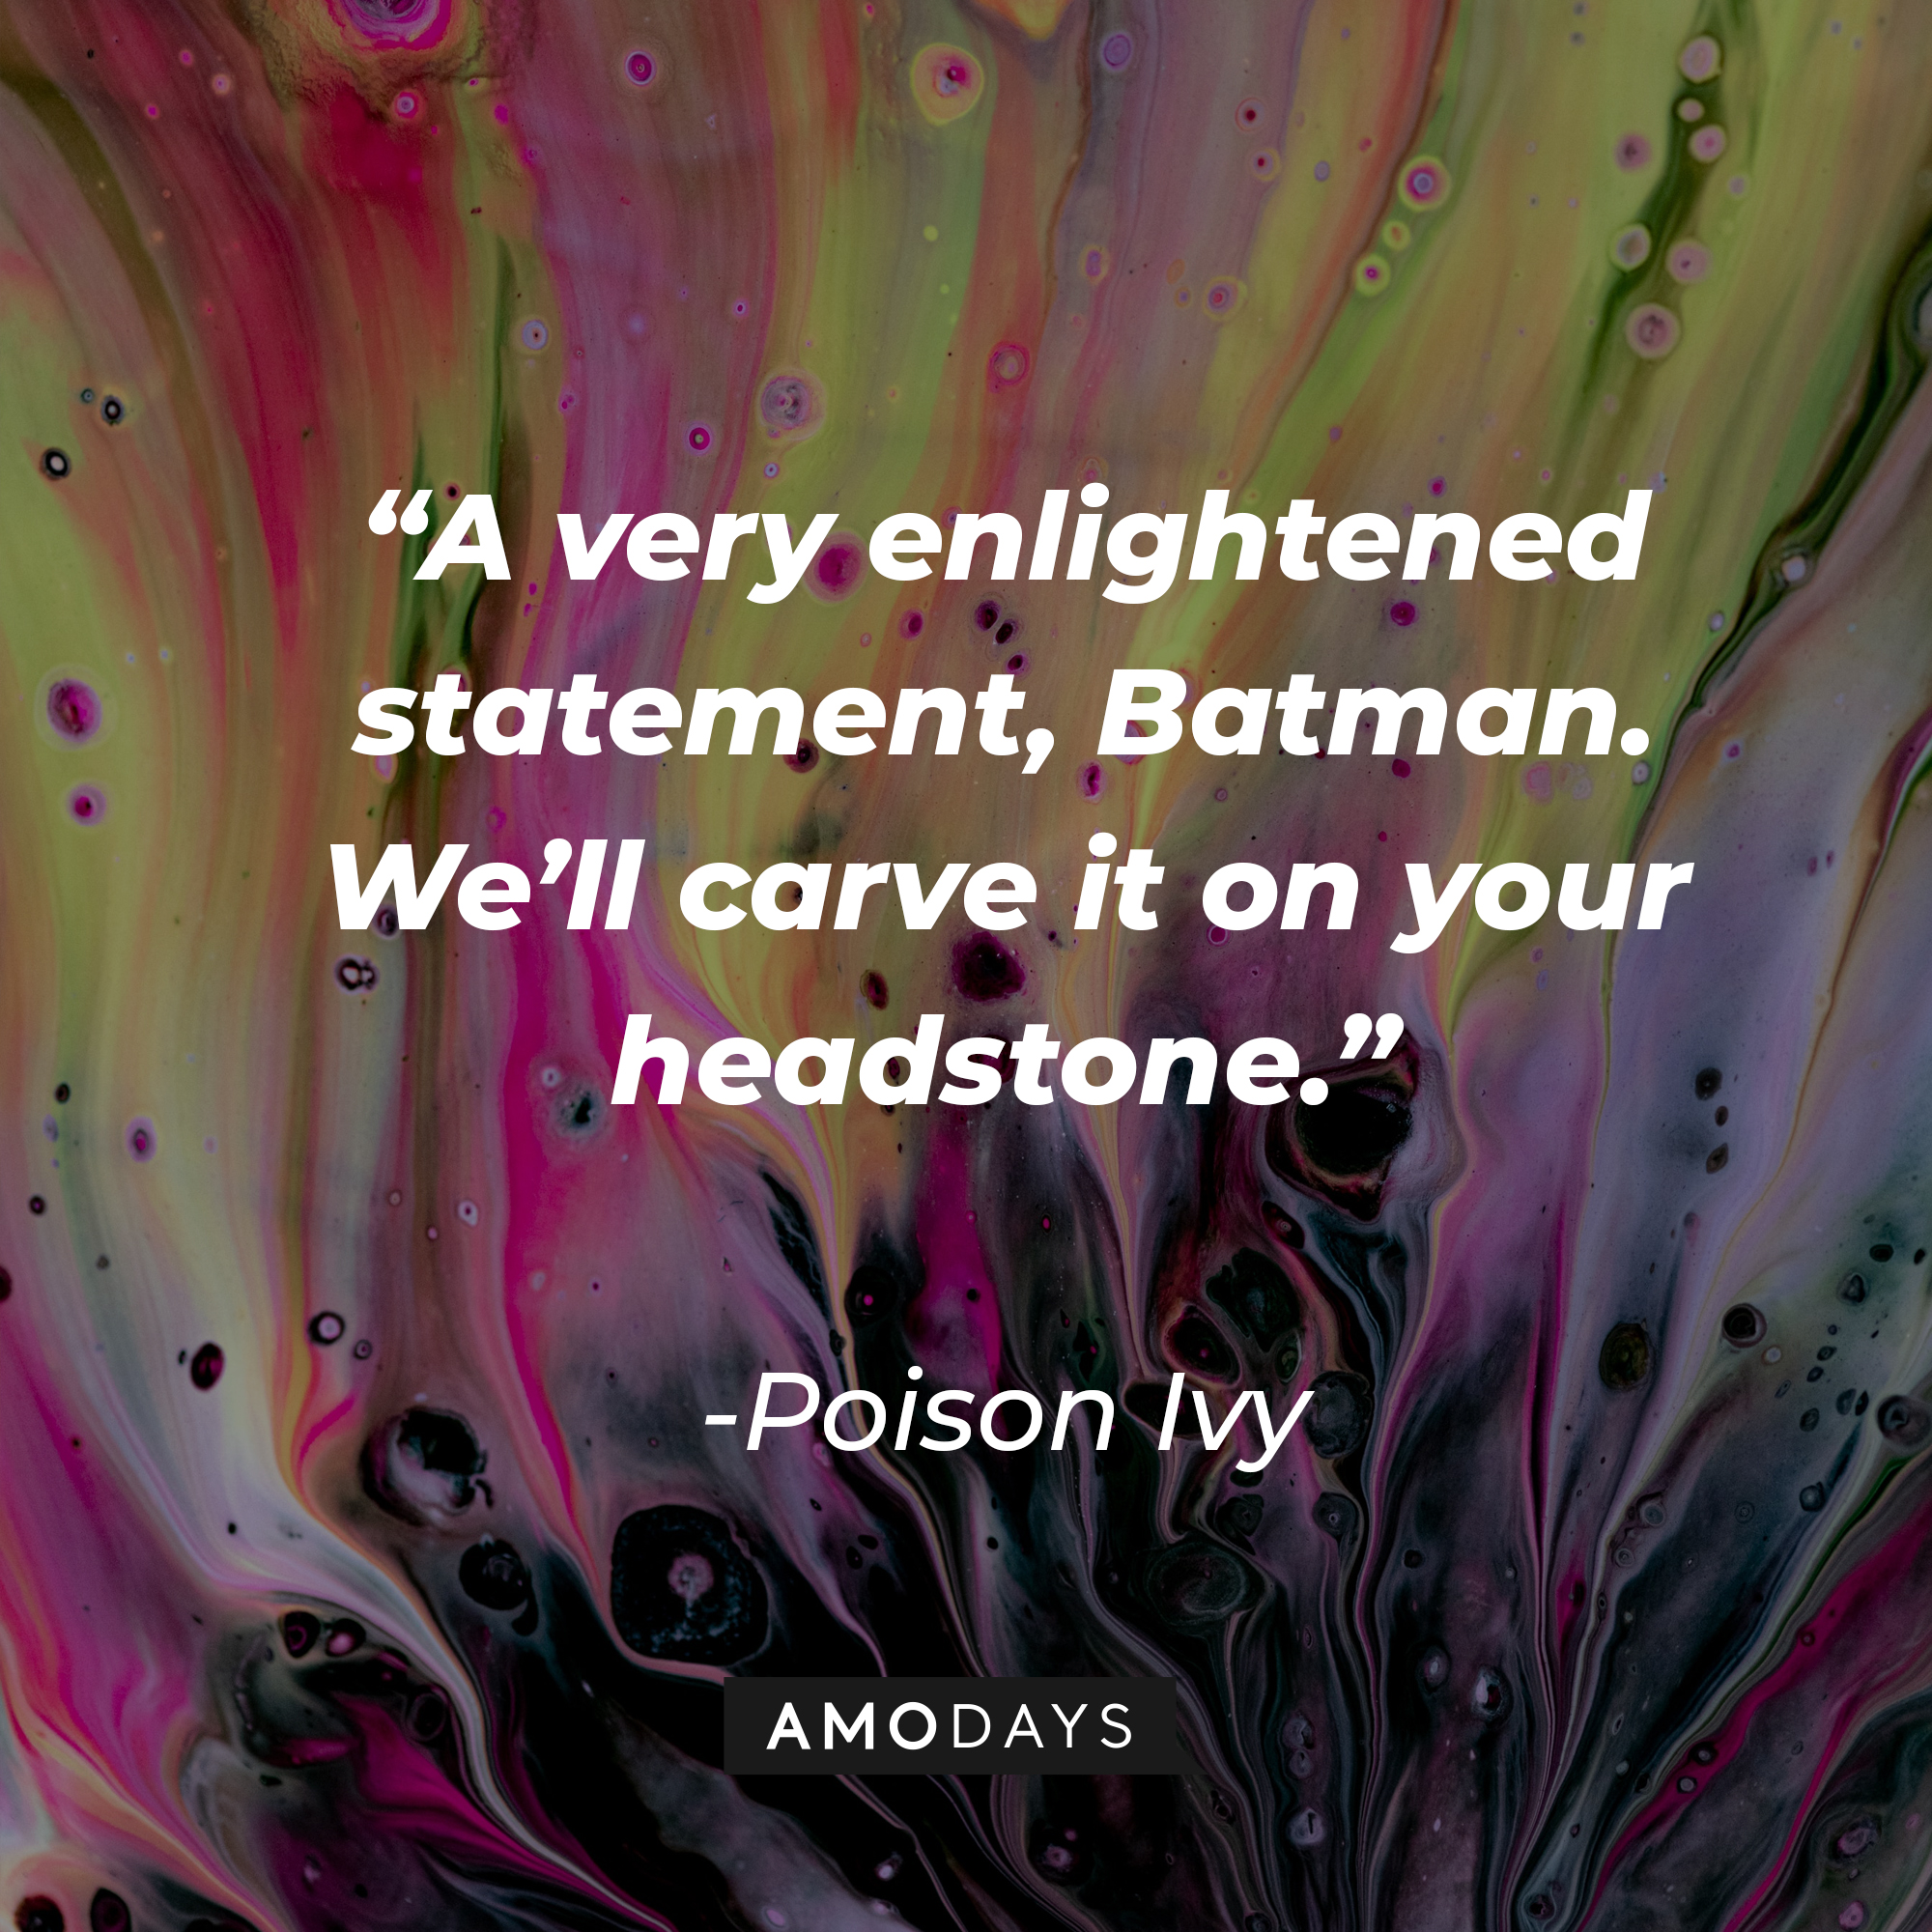 Poison Ivy’s quote: “A very enlightened statement, Batman. We’ll carve it on your headstone.” | Image: Unsplash